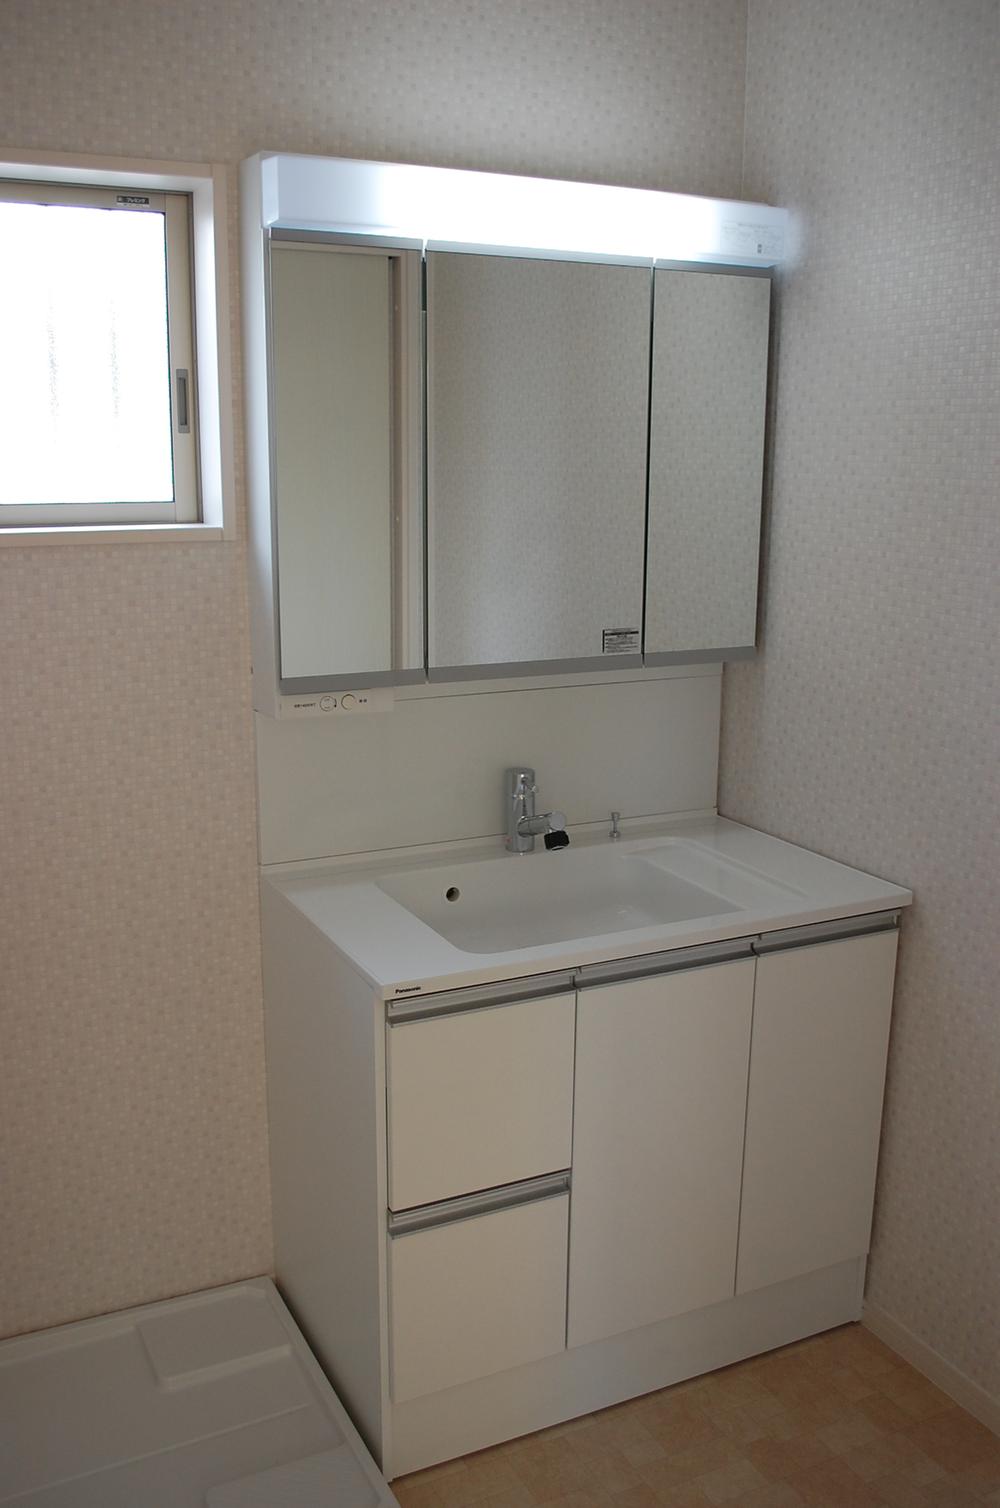 Wash basin, toilet. LIXIL made. Shower Faucets. Wide three-sided mirror.